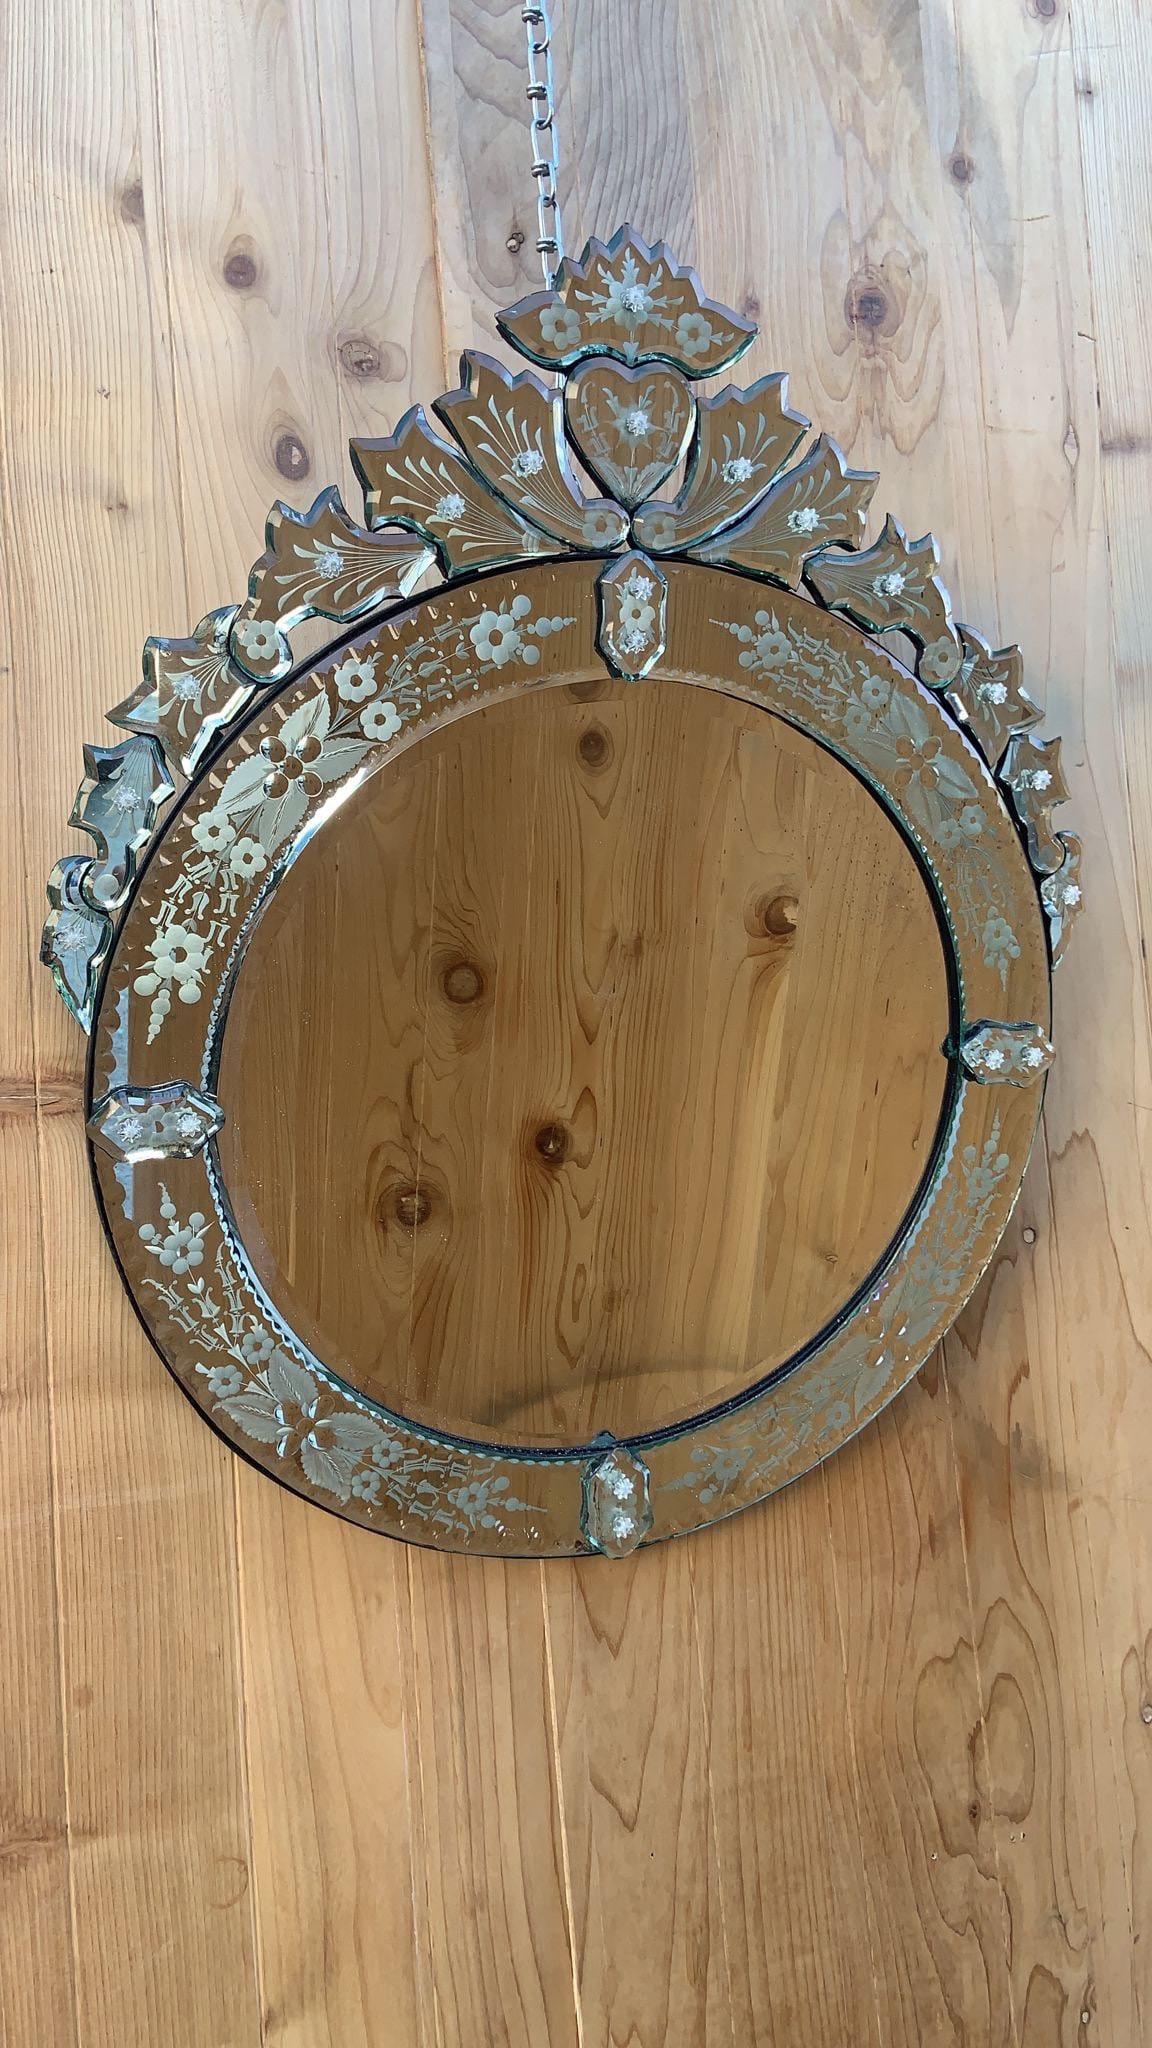 Vintage Venetian Etched Glass Round Wall Mirror

A round Venetian wall mirror with an elaborately detailed frame, decorated with frosted and convex floral designs.

circa 1960

Dimensions:
H: 31”
W: 24”
D: 1”

Good vintage condition
